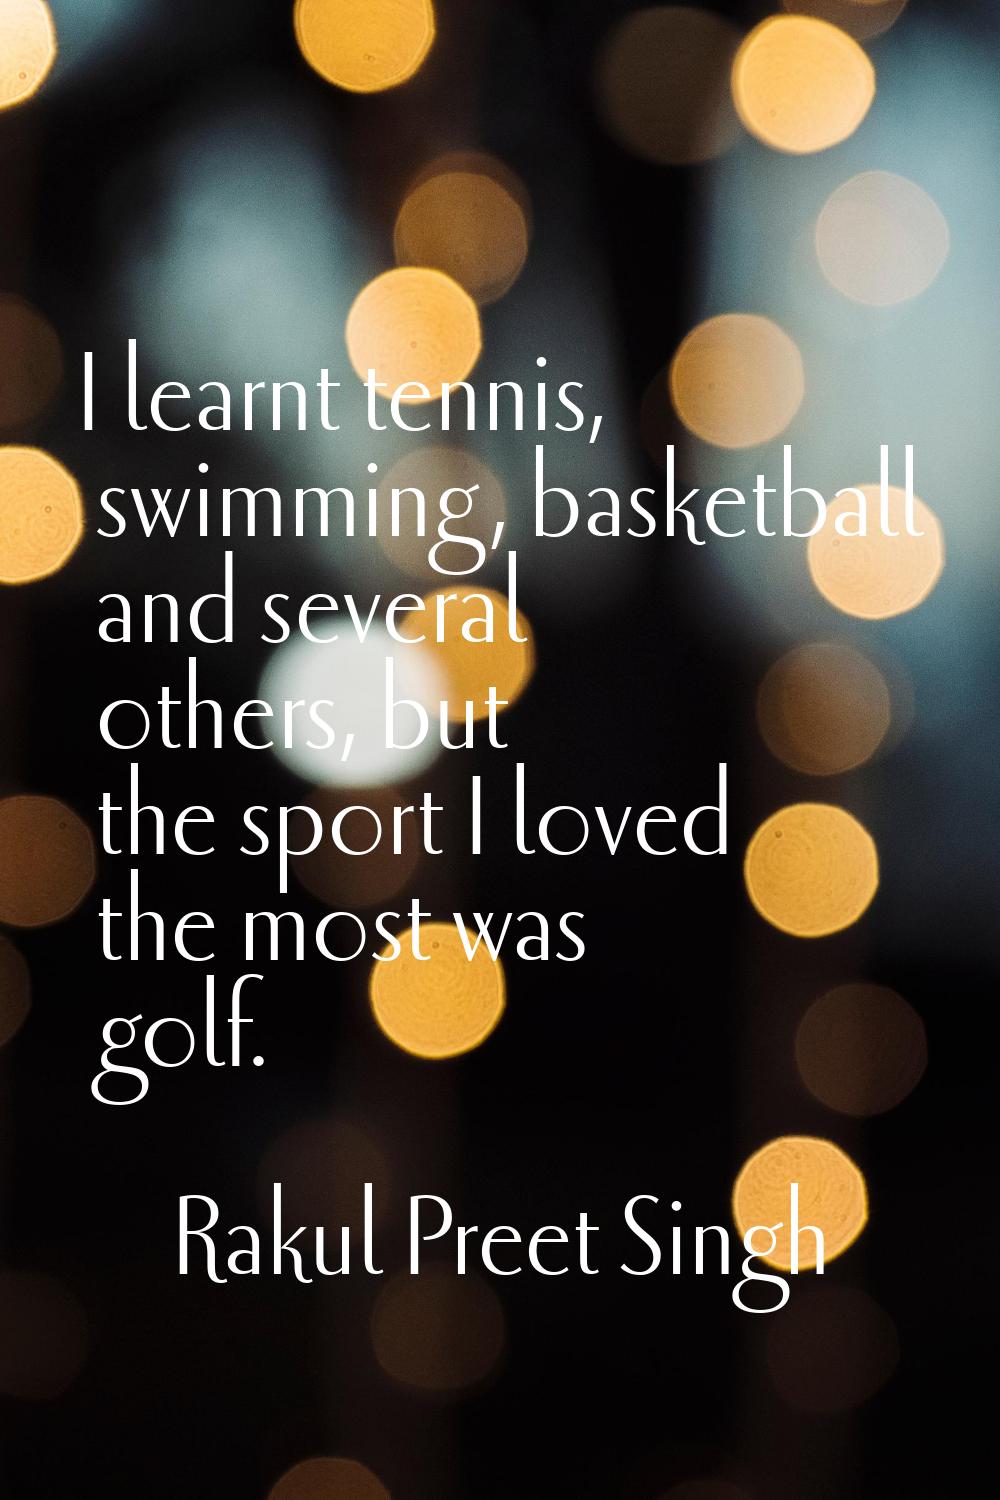 I learnt tennis, swimming, basketball and several others, but the sport I loved the most was golf.